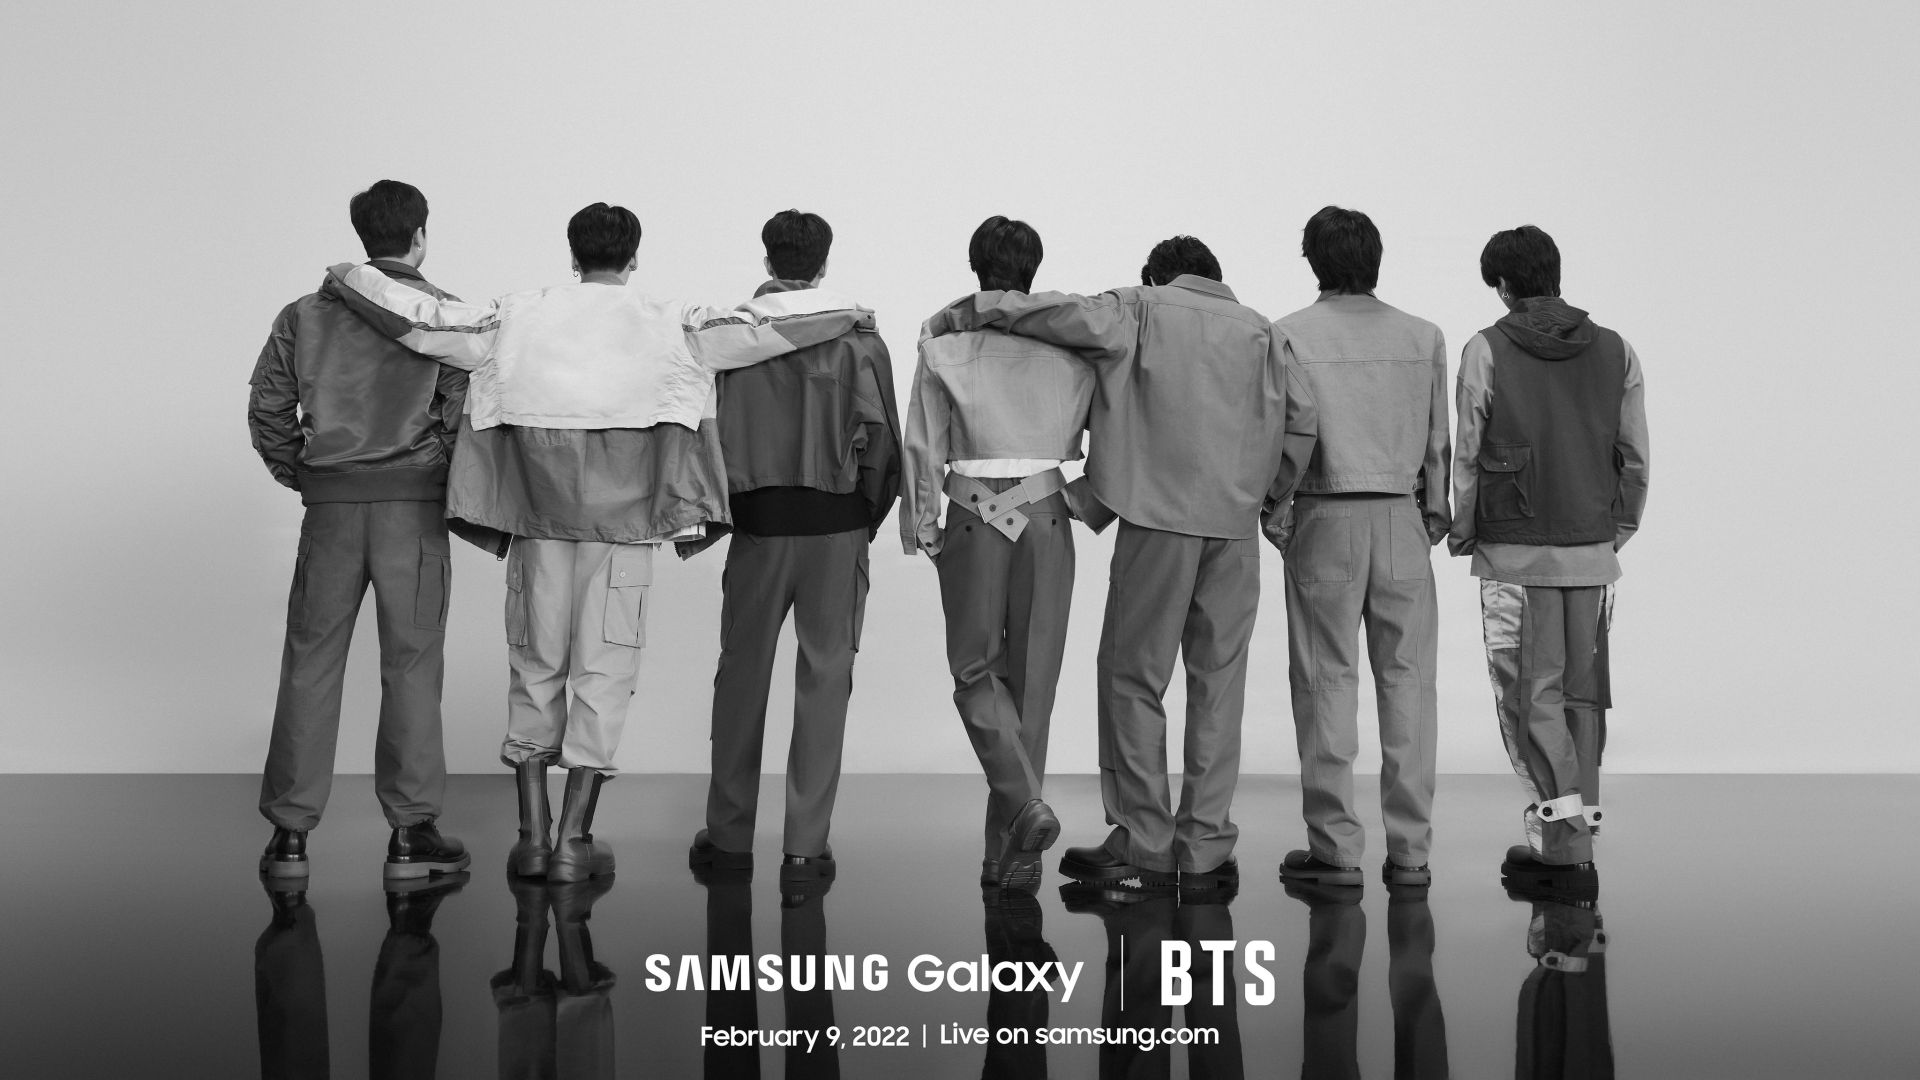 When do you think bts' Samsung endorsement contract ends? As they